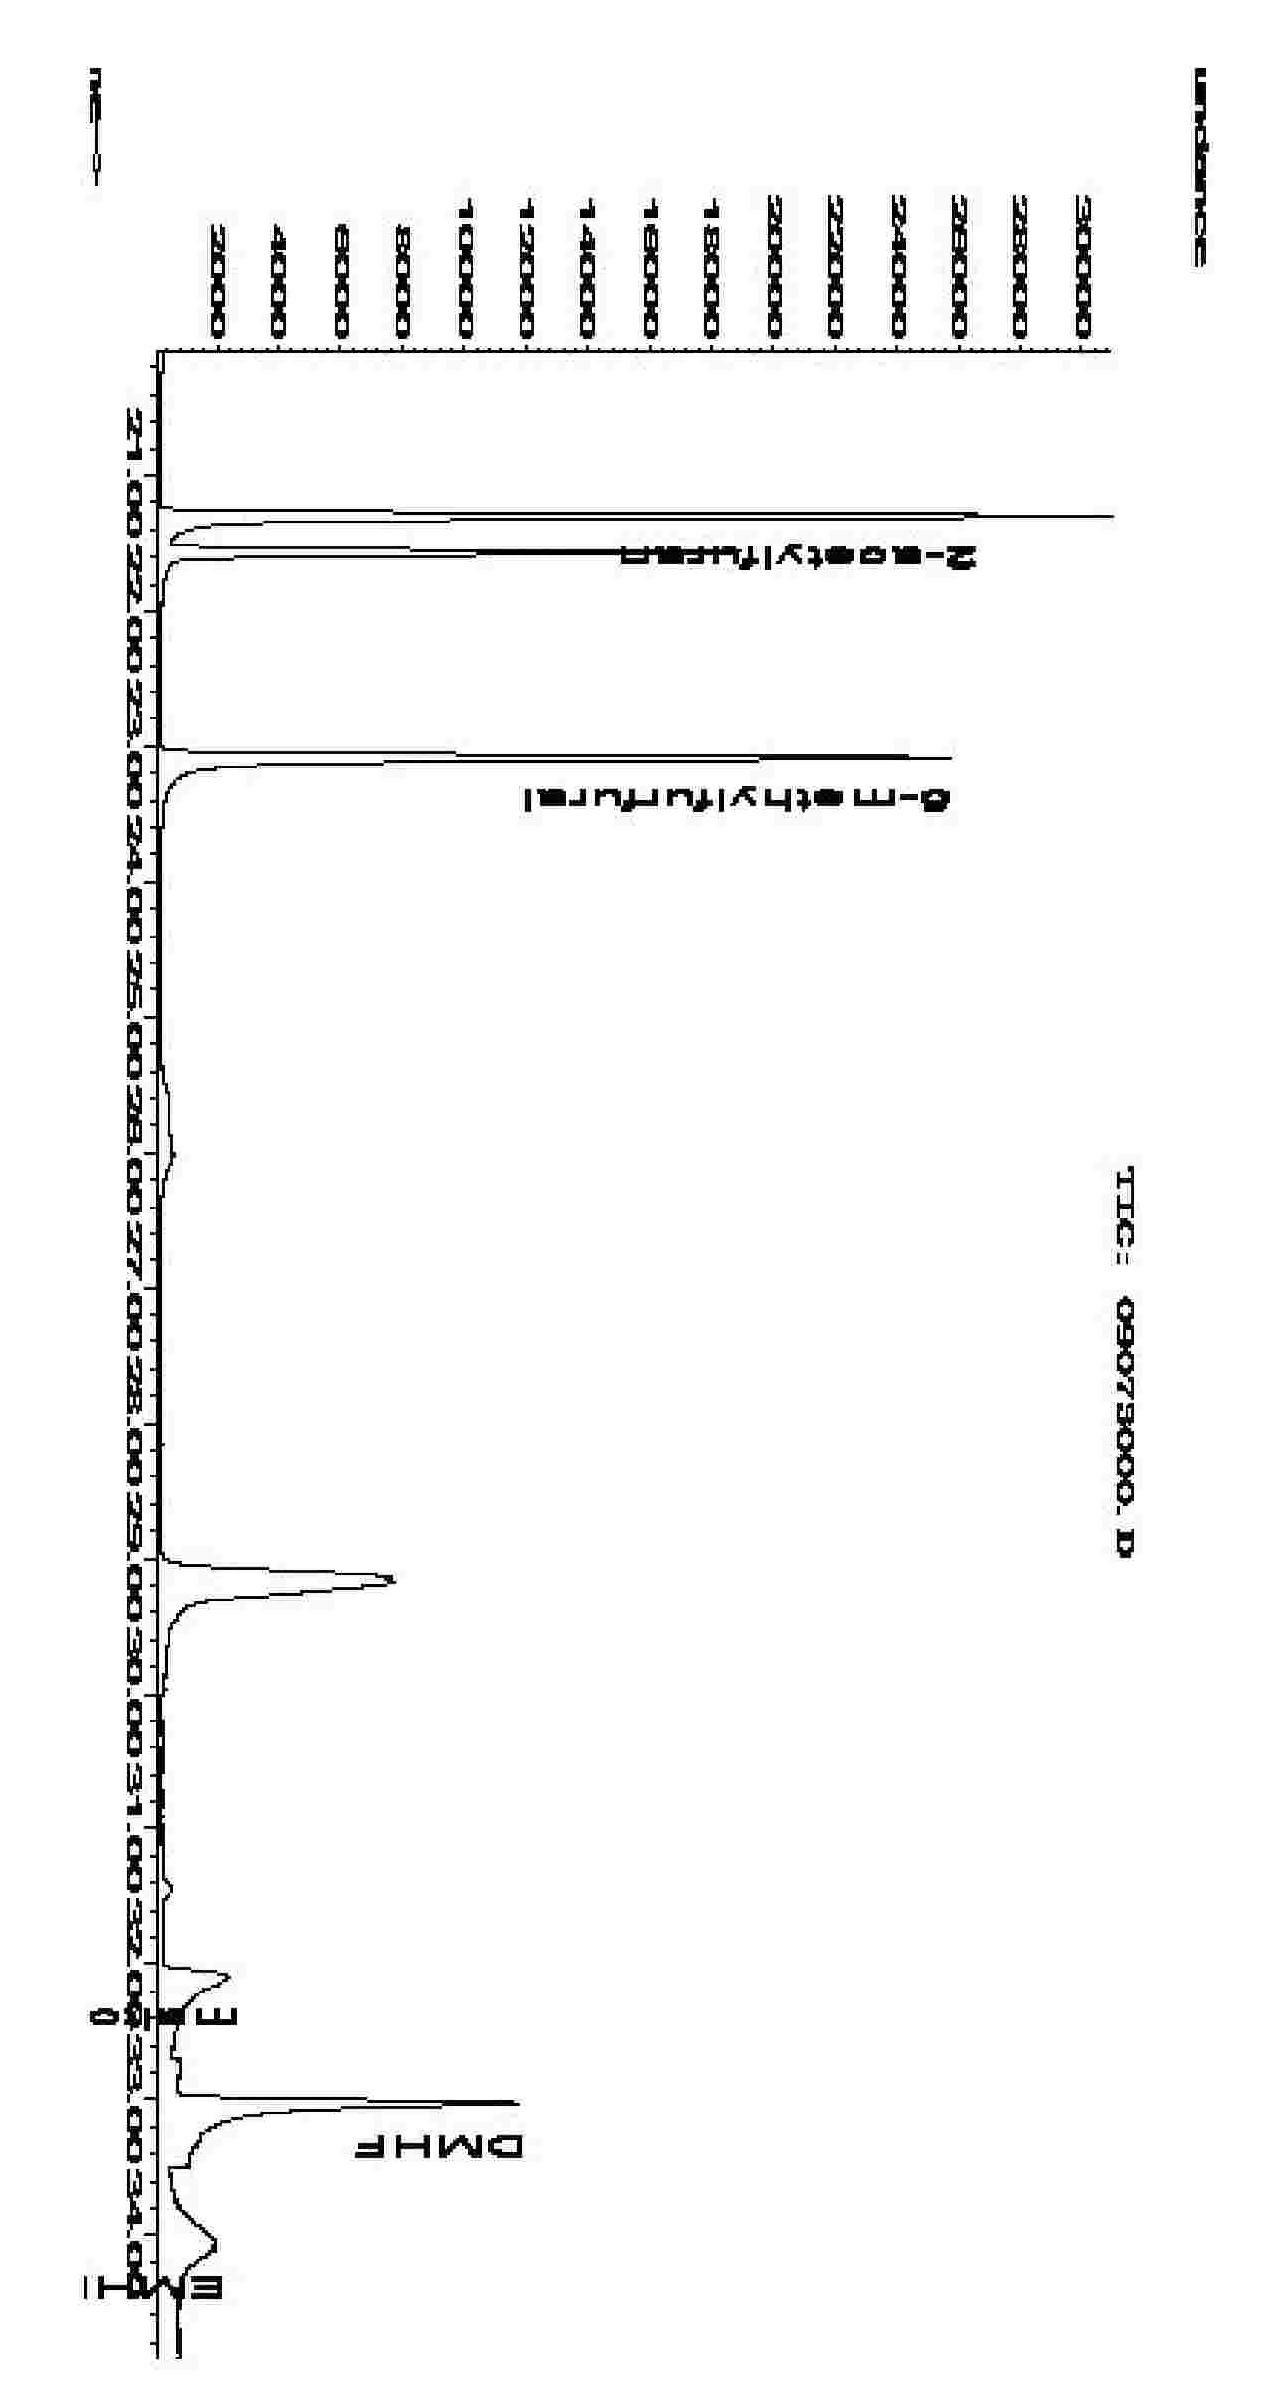 Analysis method for detecting furans compounds and pyrans compounds in beer